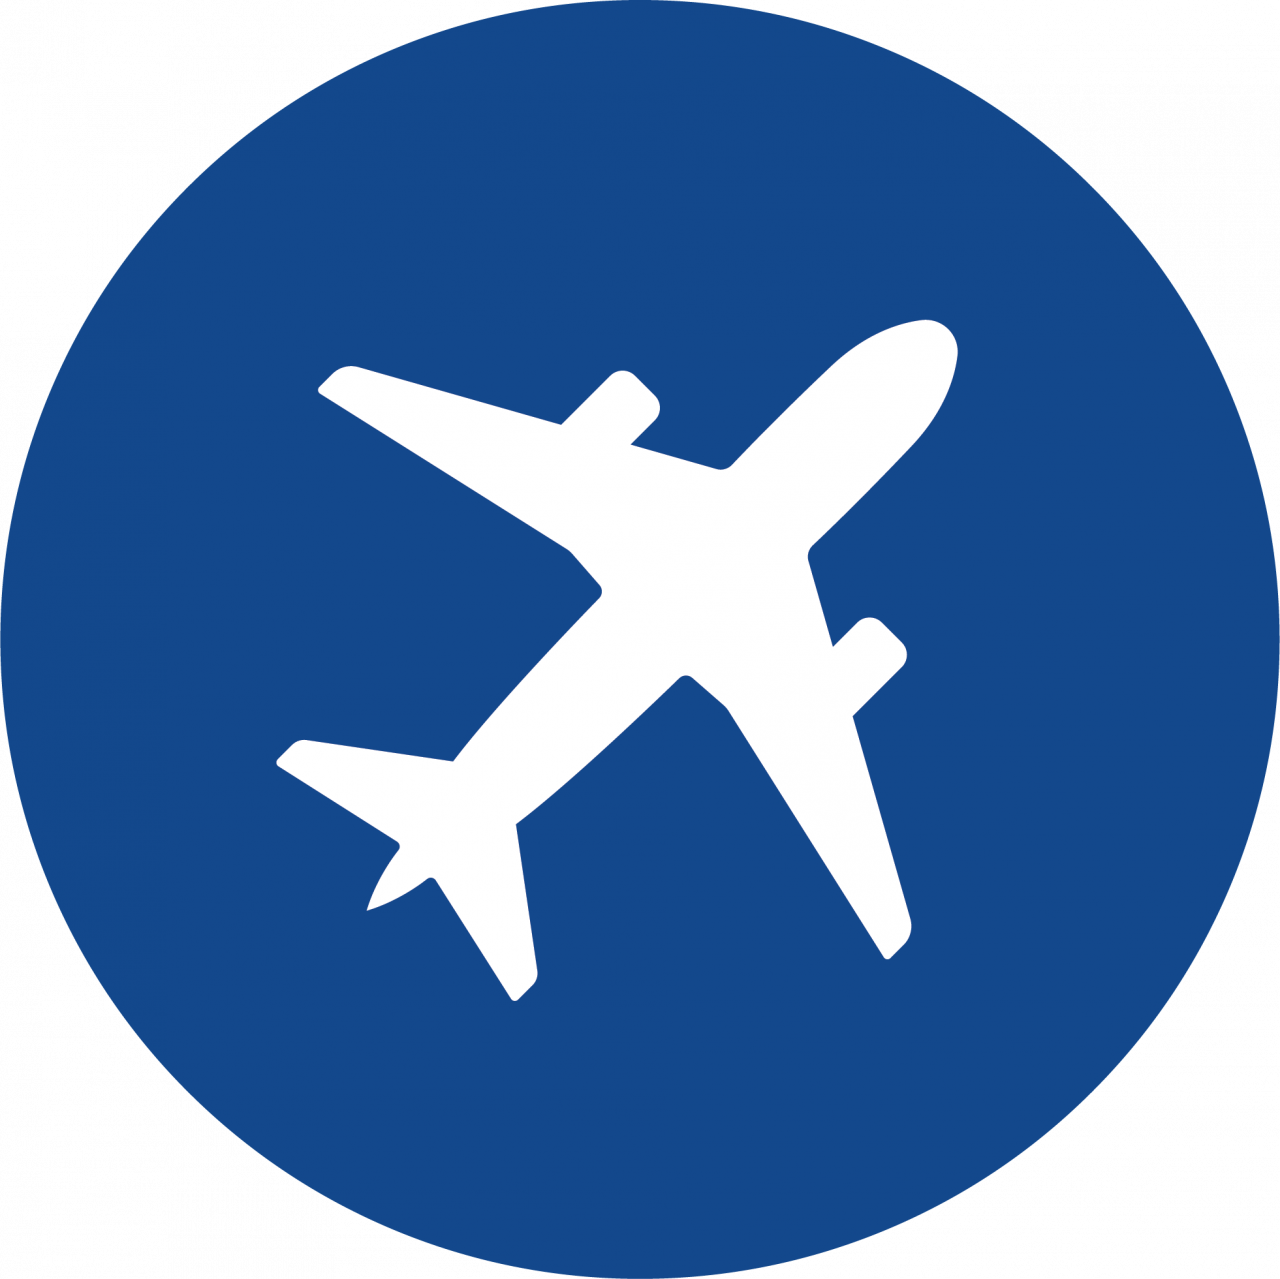 Blue circle with white plane icon centered inside